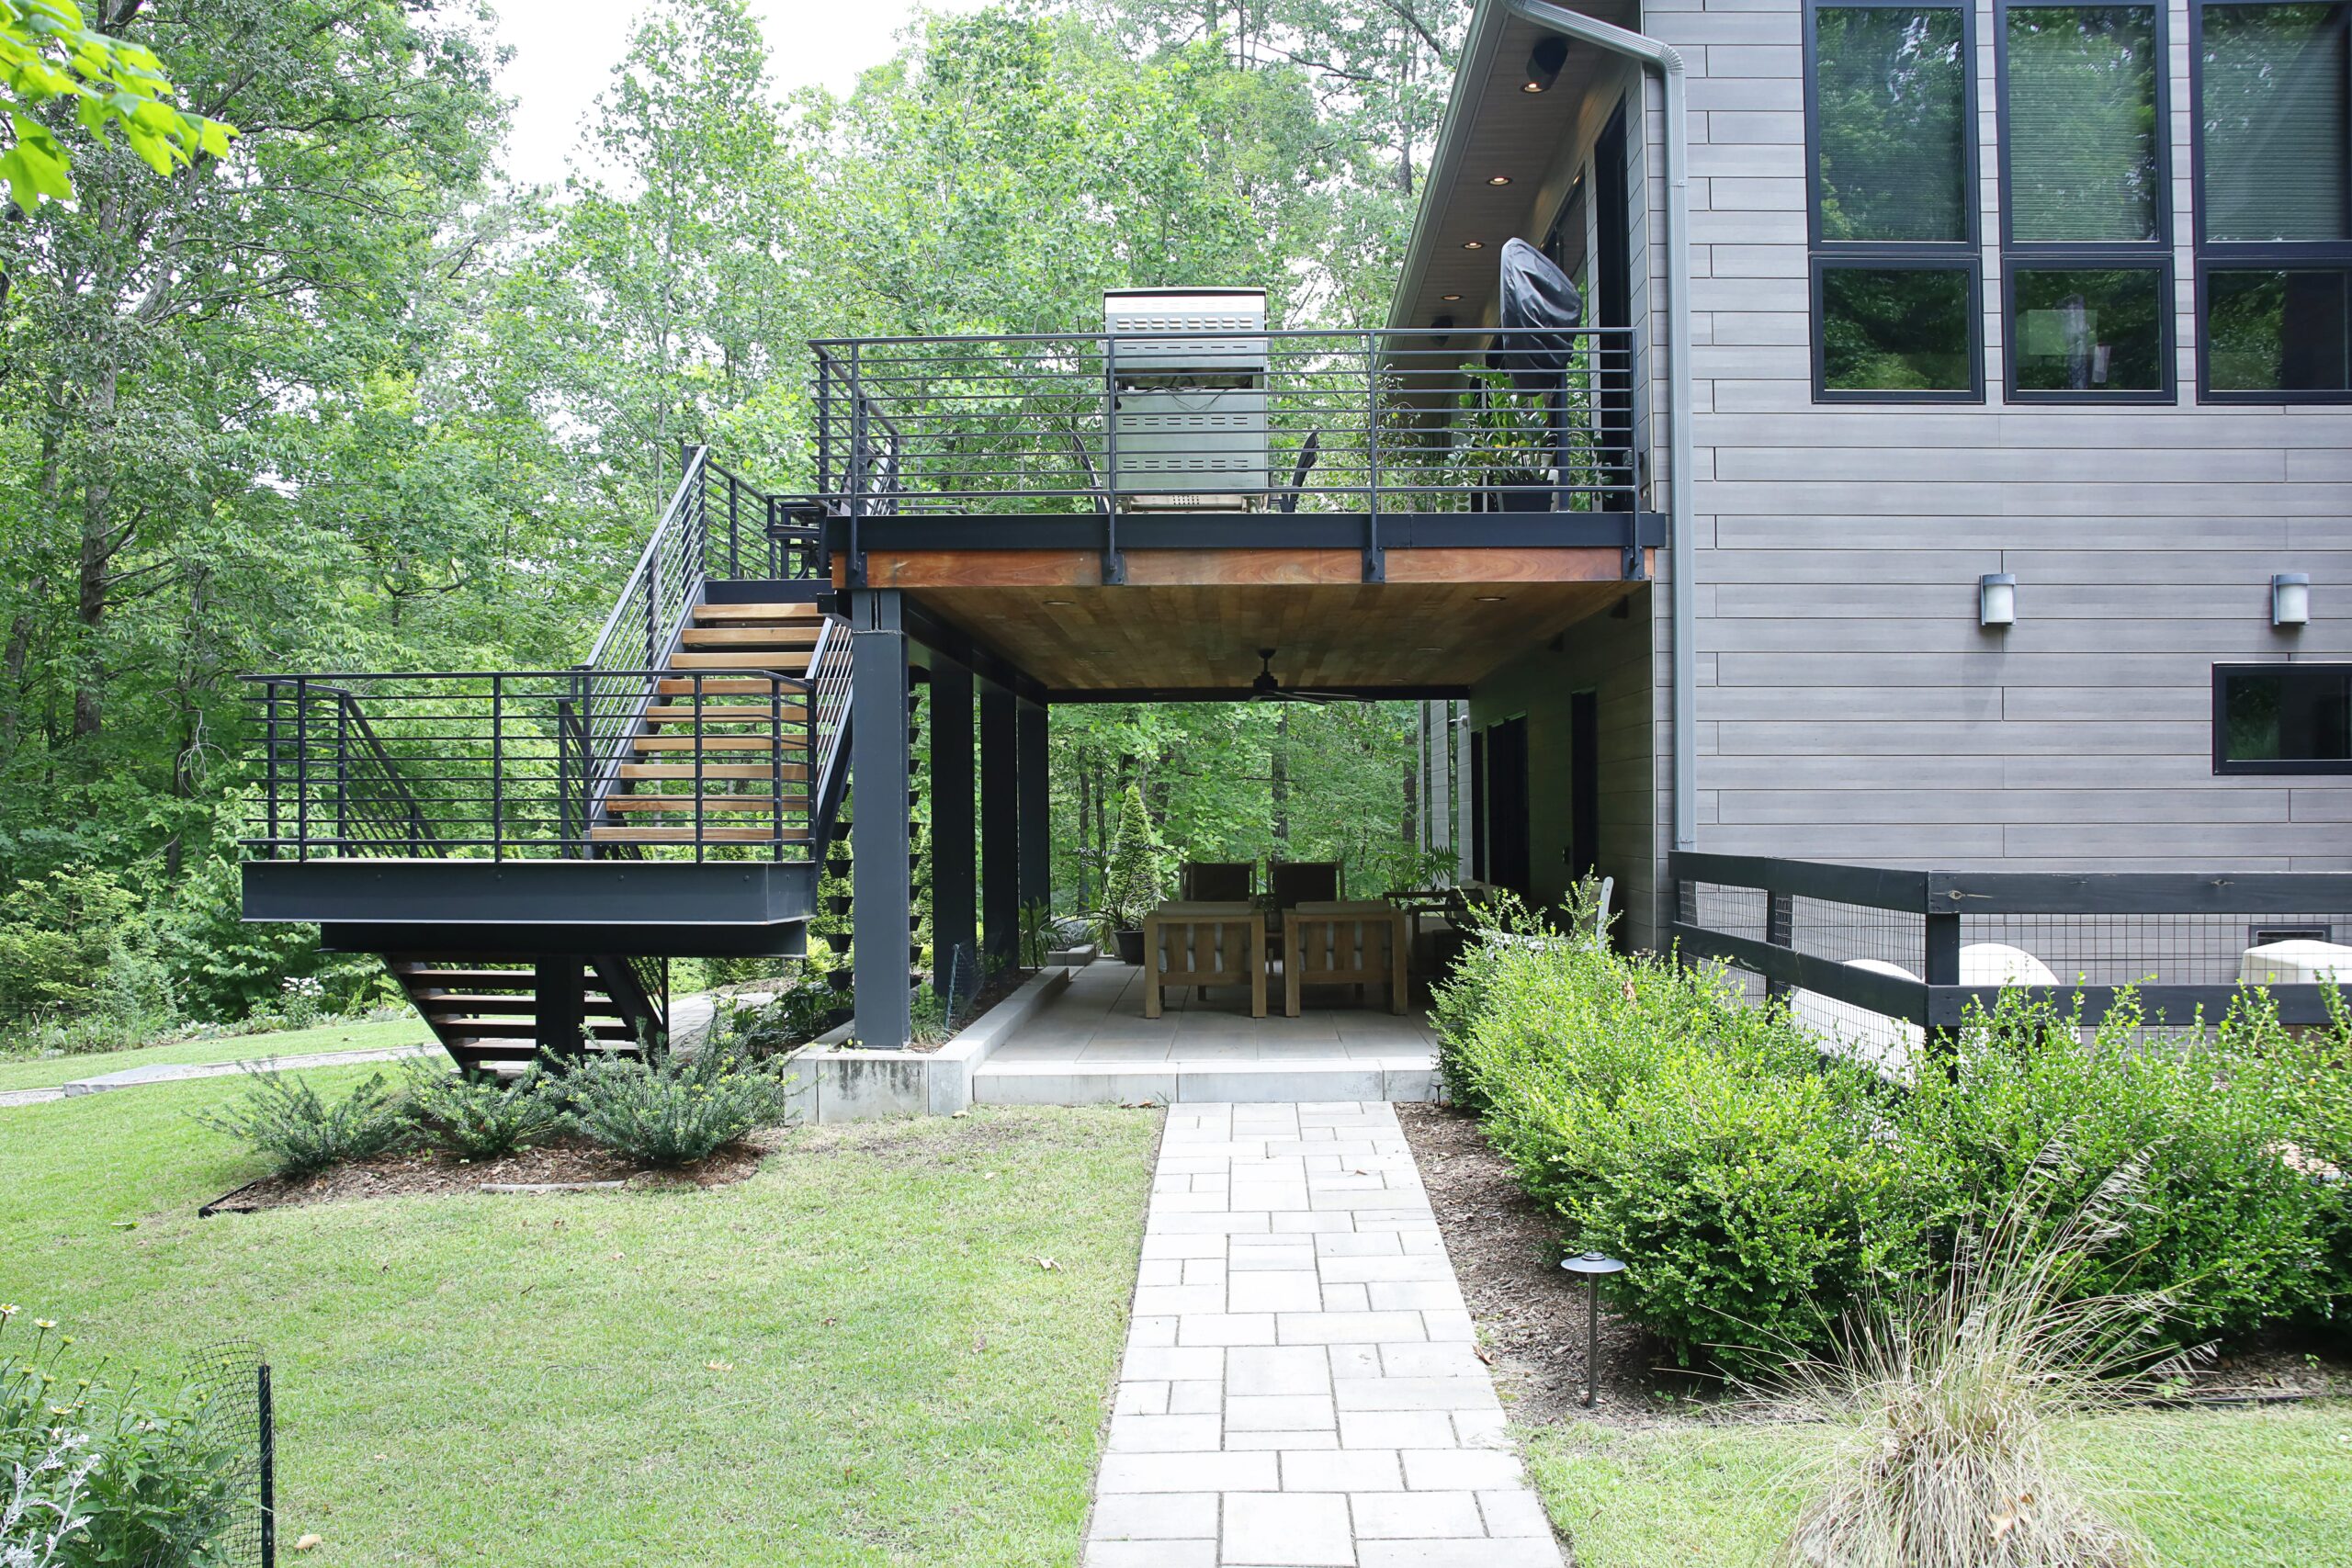 A lower level patio is shaded by an upper level balcony, connected by an open-riser steel staircase.